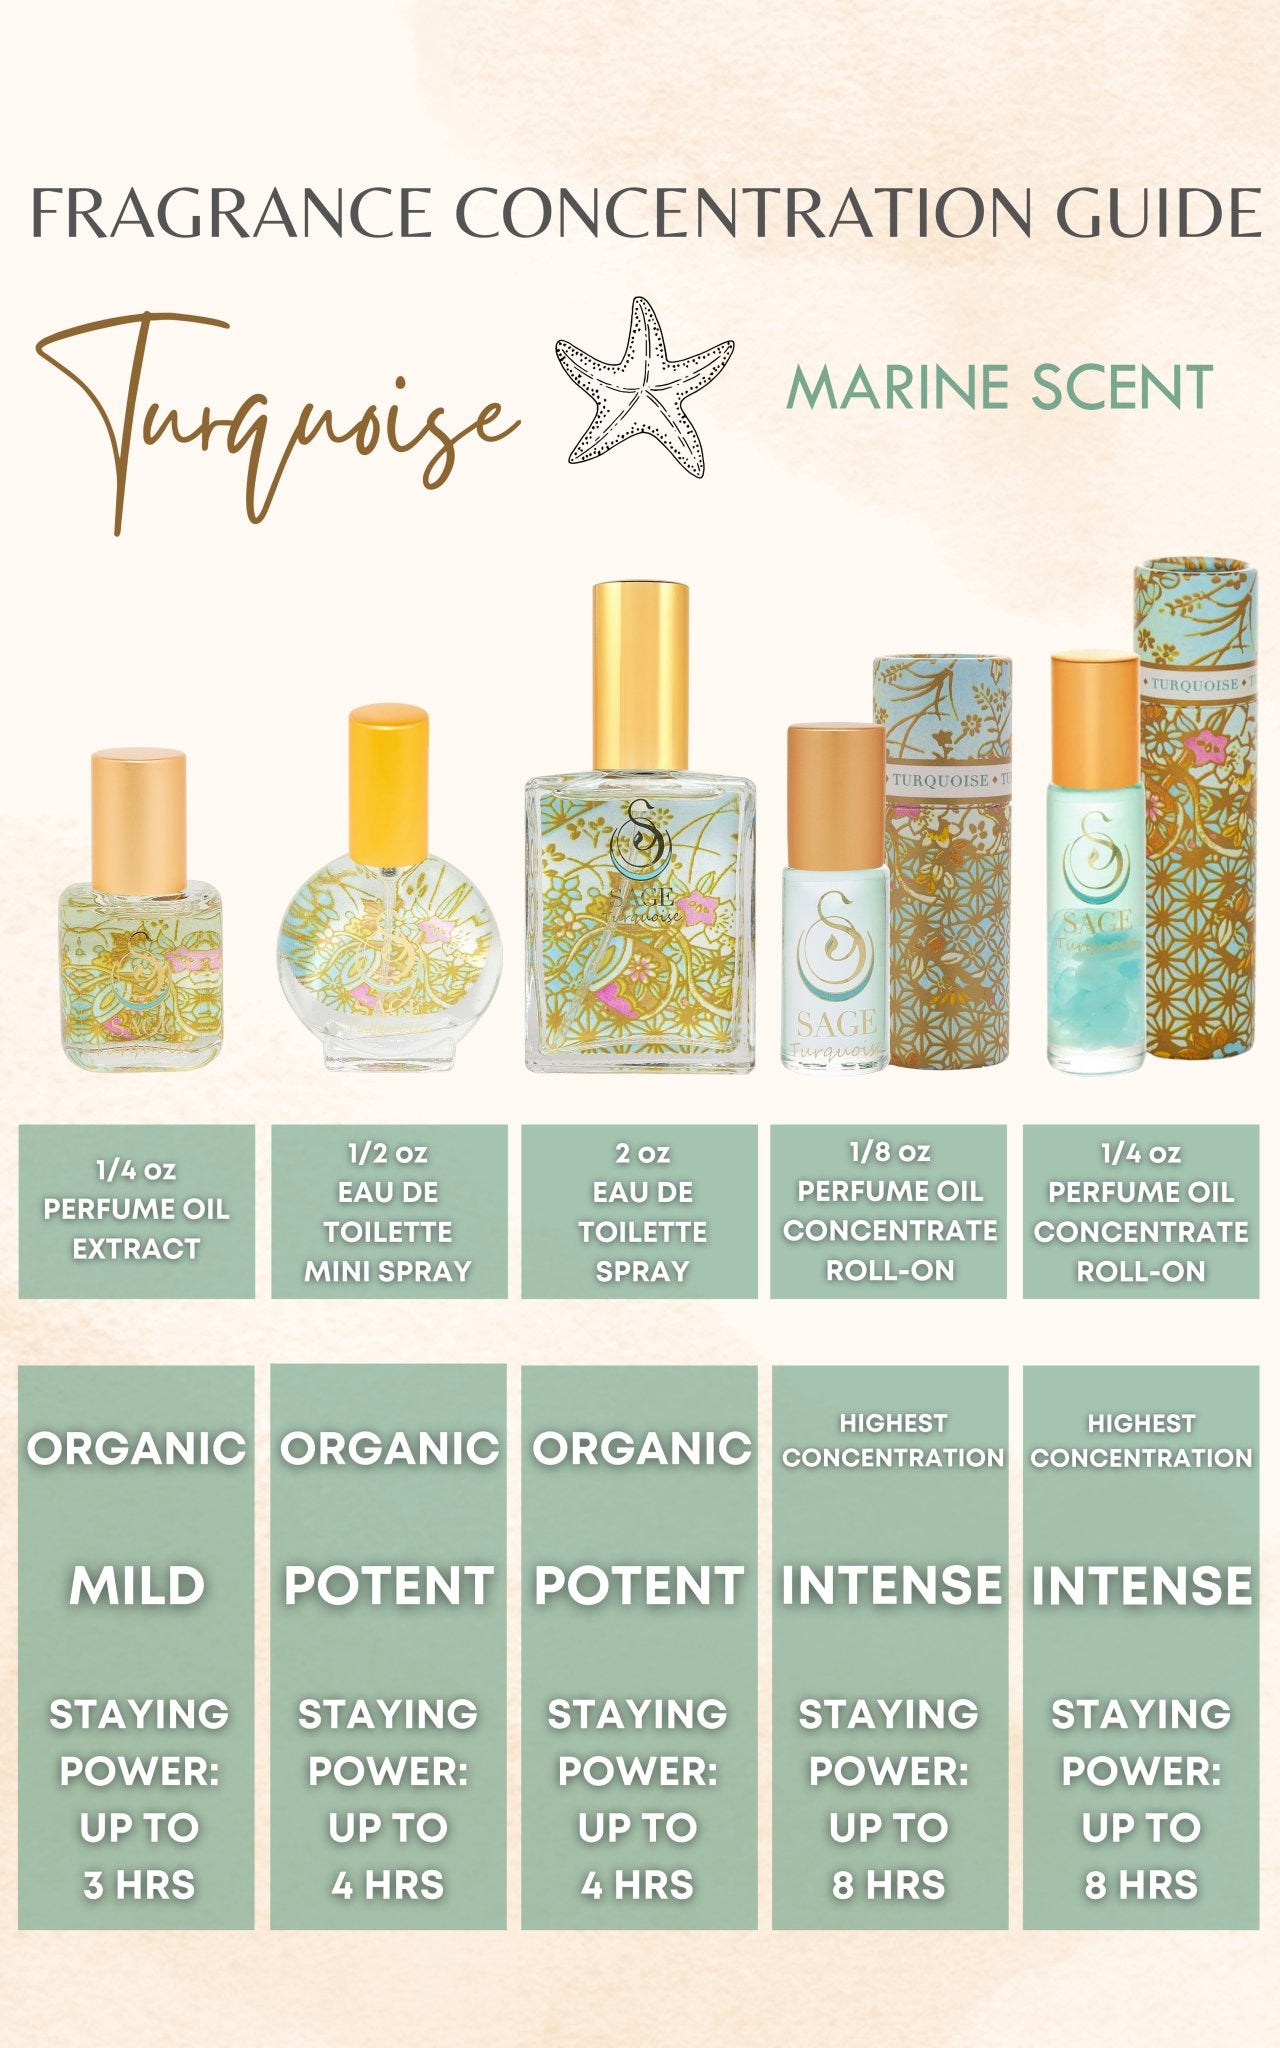 OBSESSION ~ TURQUOISE Gemstone Perfume Oil Concentrate Roll-Ons and Eau de Toilette Gift Set by Sage - The Sage Lifestyle